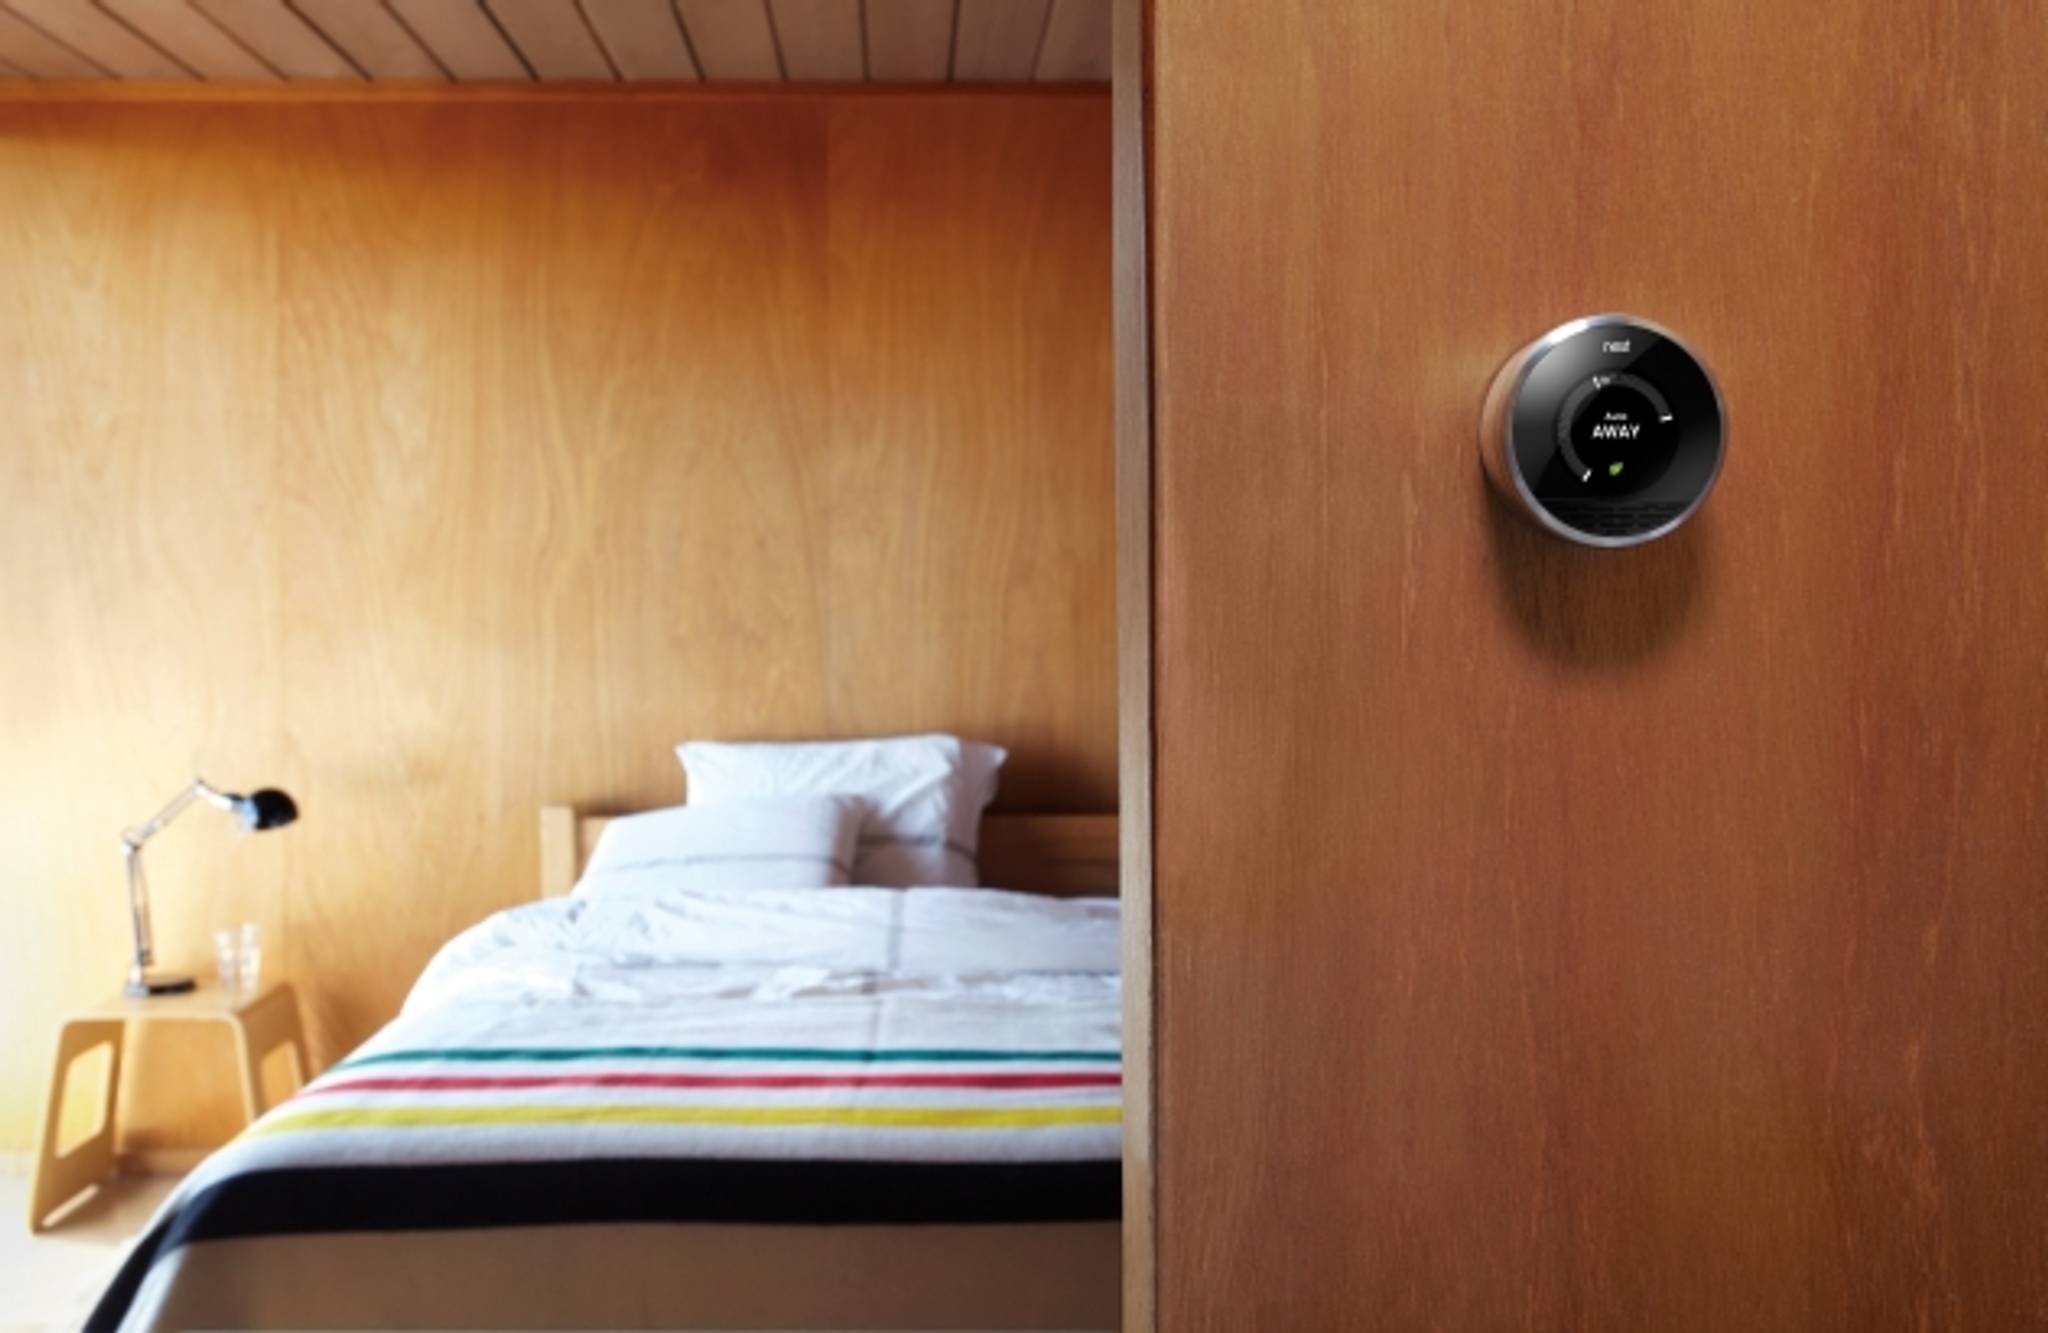 Nest Thermostat turns up the heat